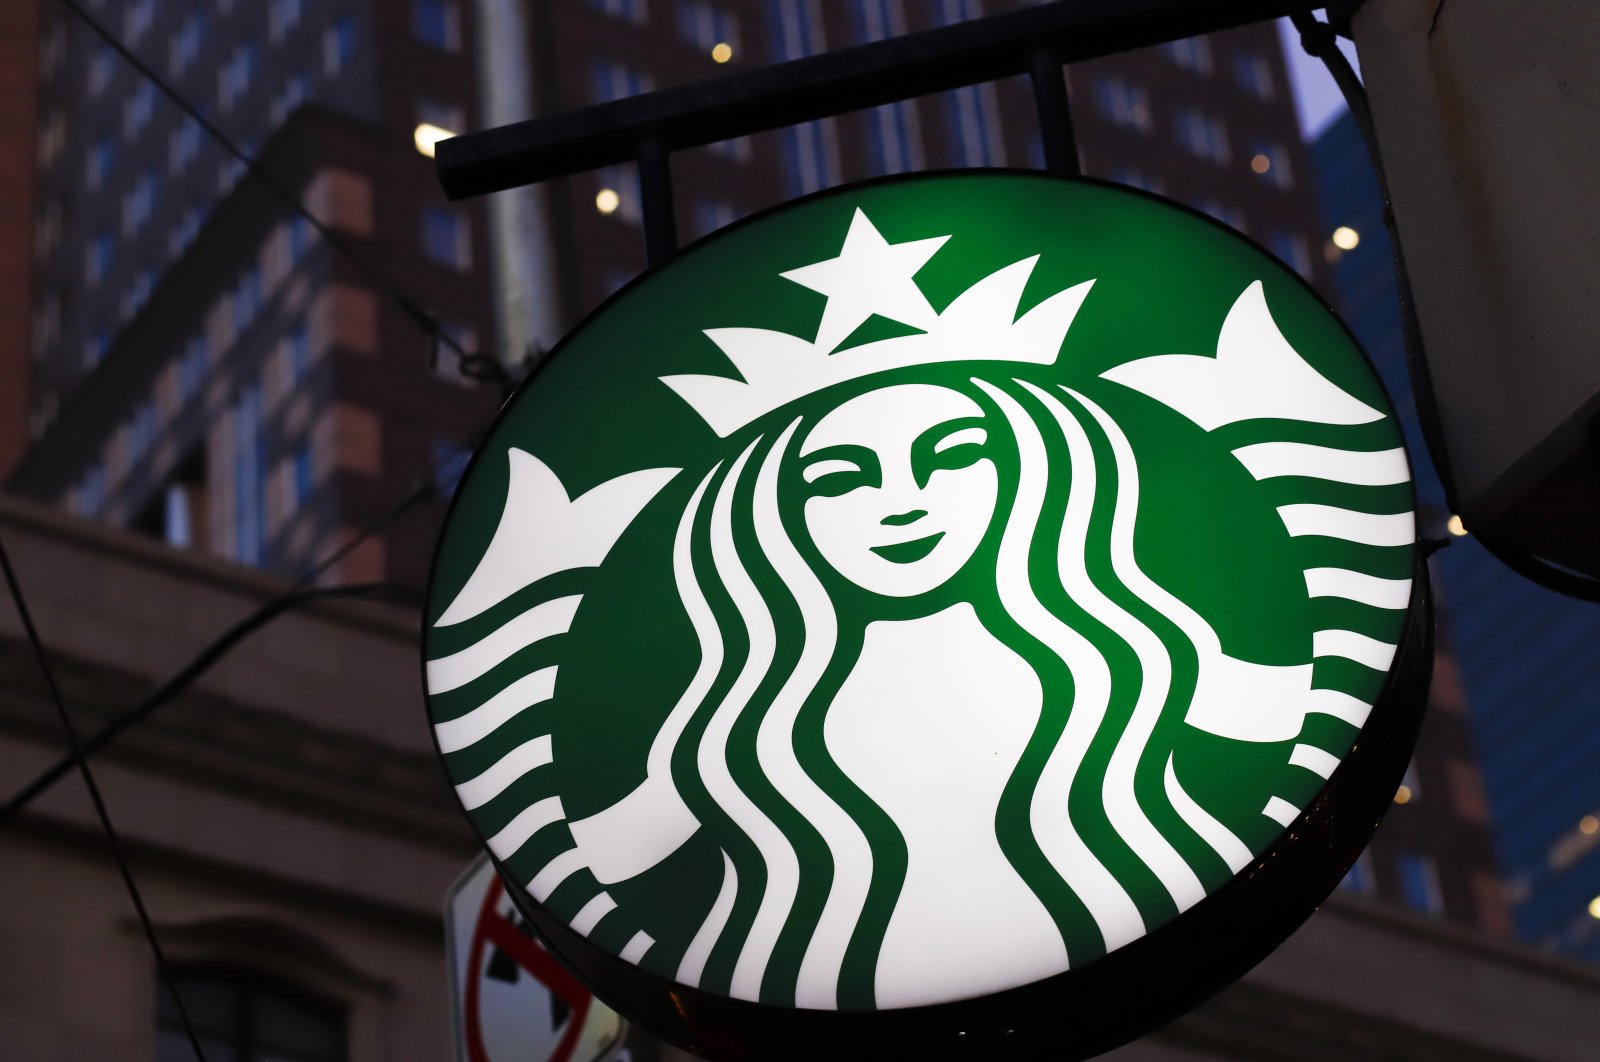 A Starbucks sign is seen outside a Starbucks coffee shop in downtown Pittsburgh, Ontario, Canada, June 26, 2019. (AP Photo)